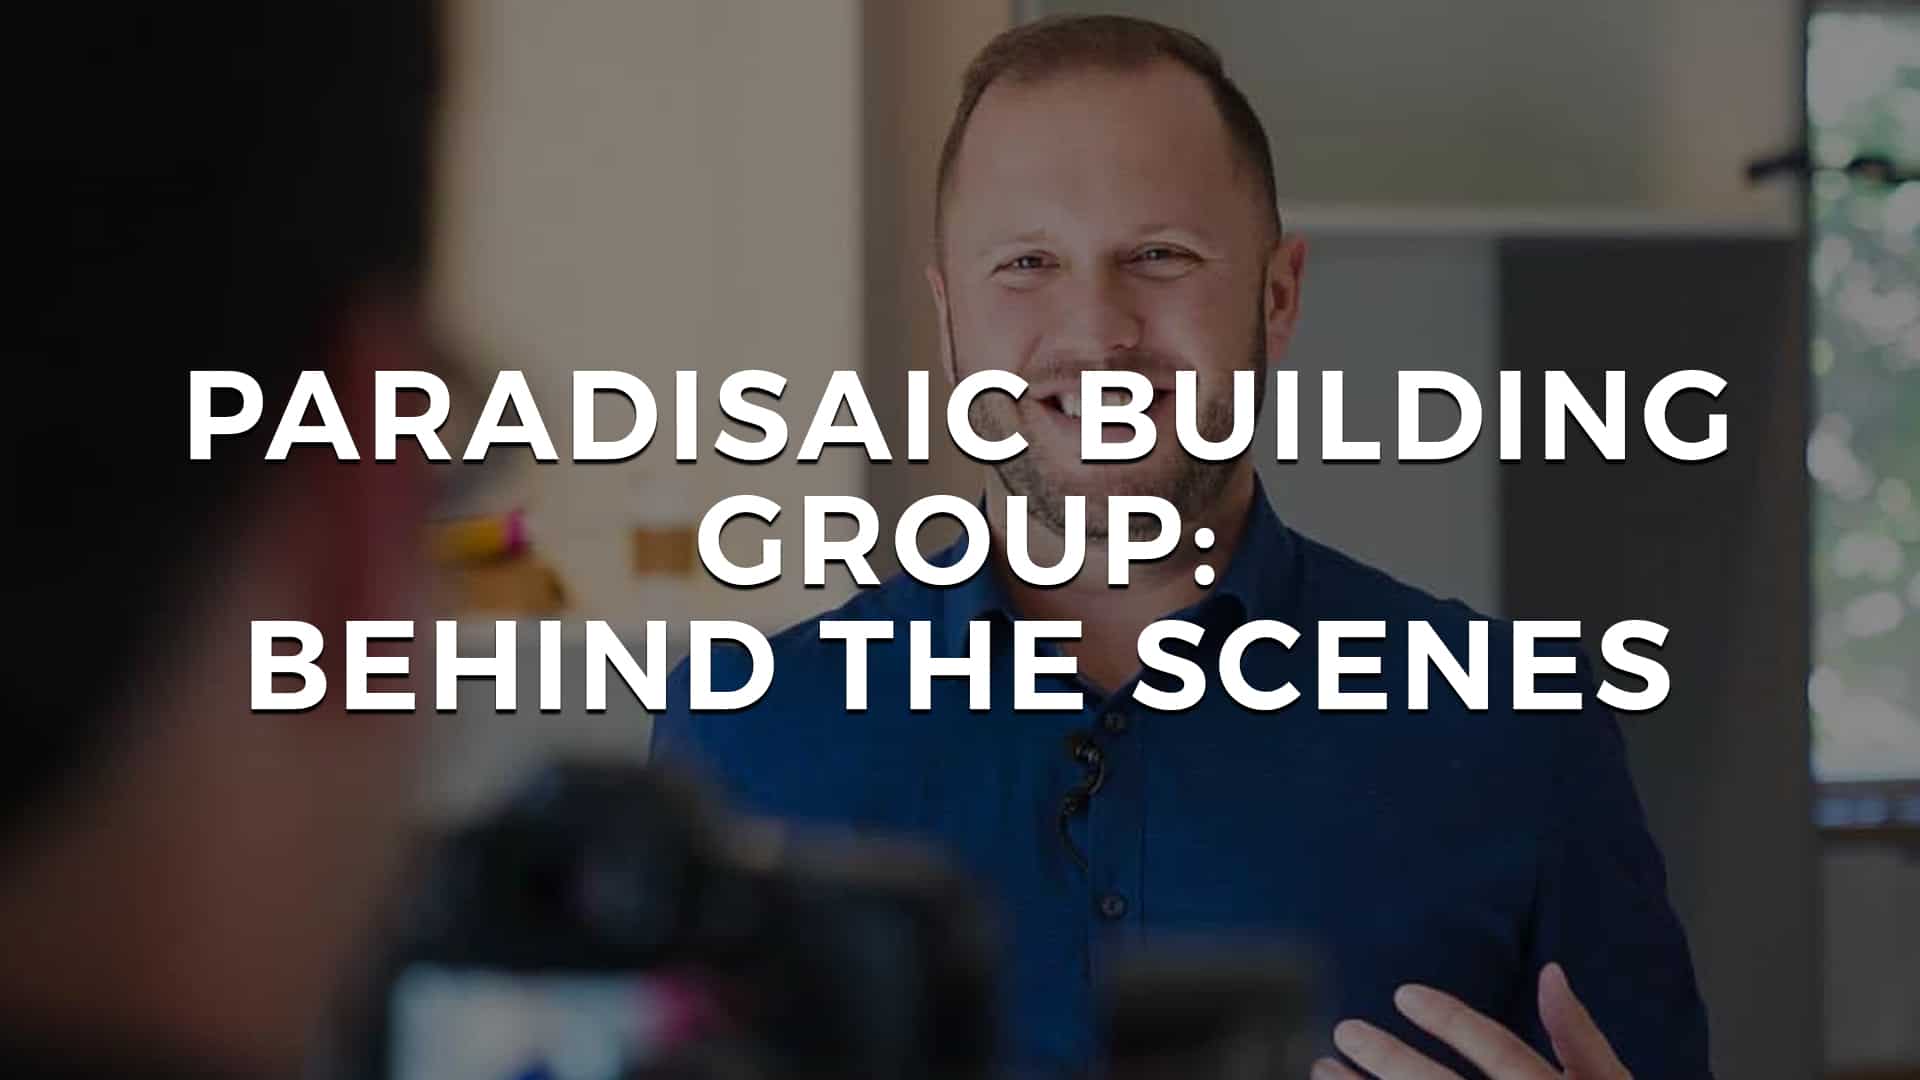 You are currently viewing Behind the Scenes with Paradisaic Building Group